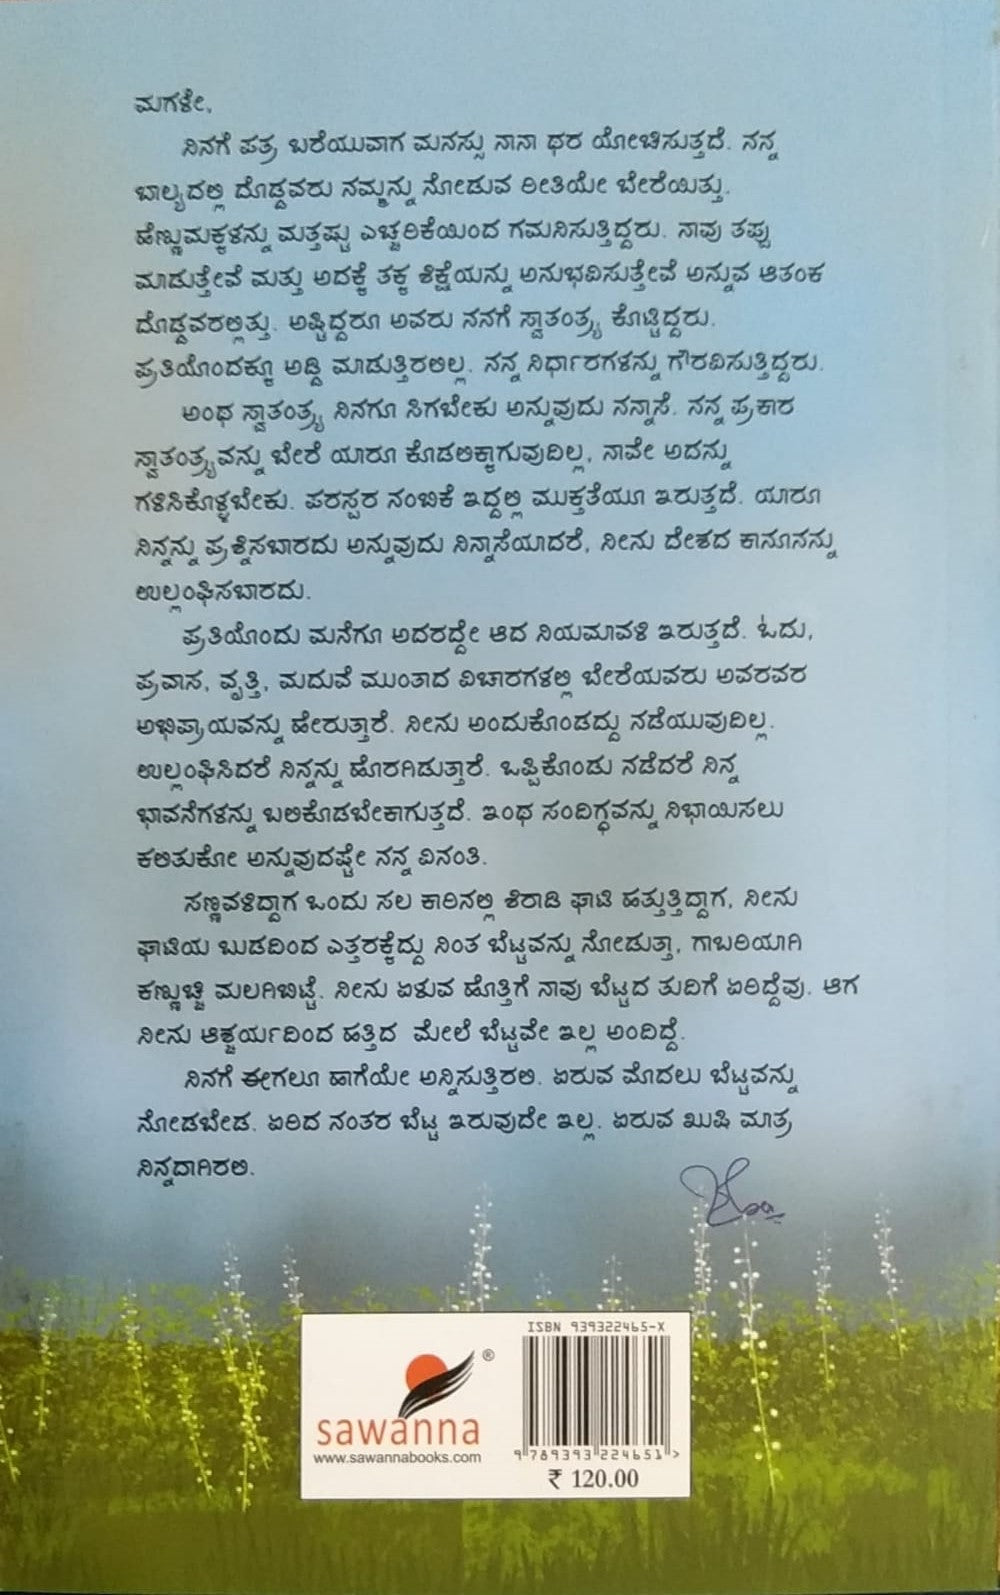 Magalige Bareyada Patragalu is a Personal Experiences Witten by Jogi and Published by Sawanna Enterprised